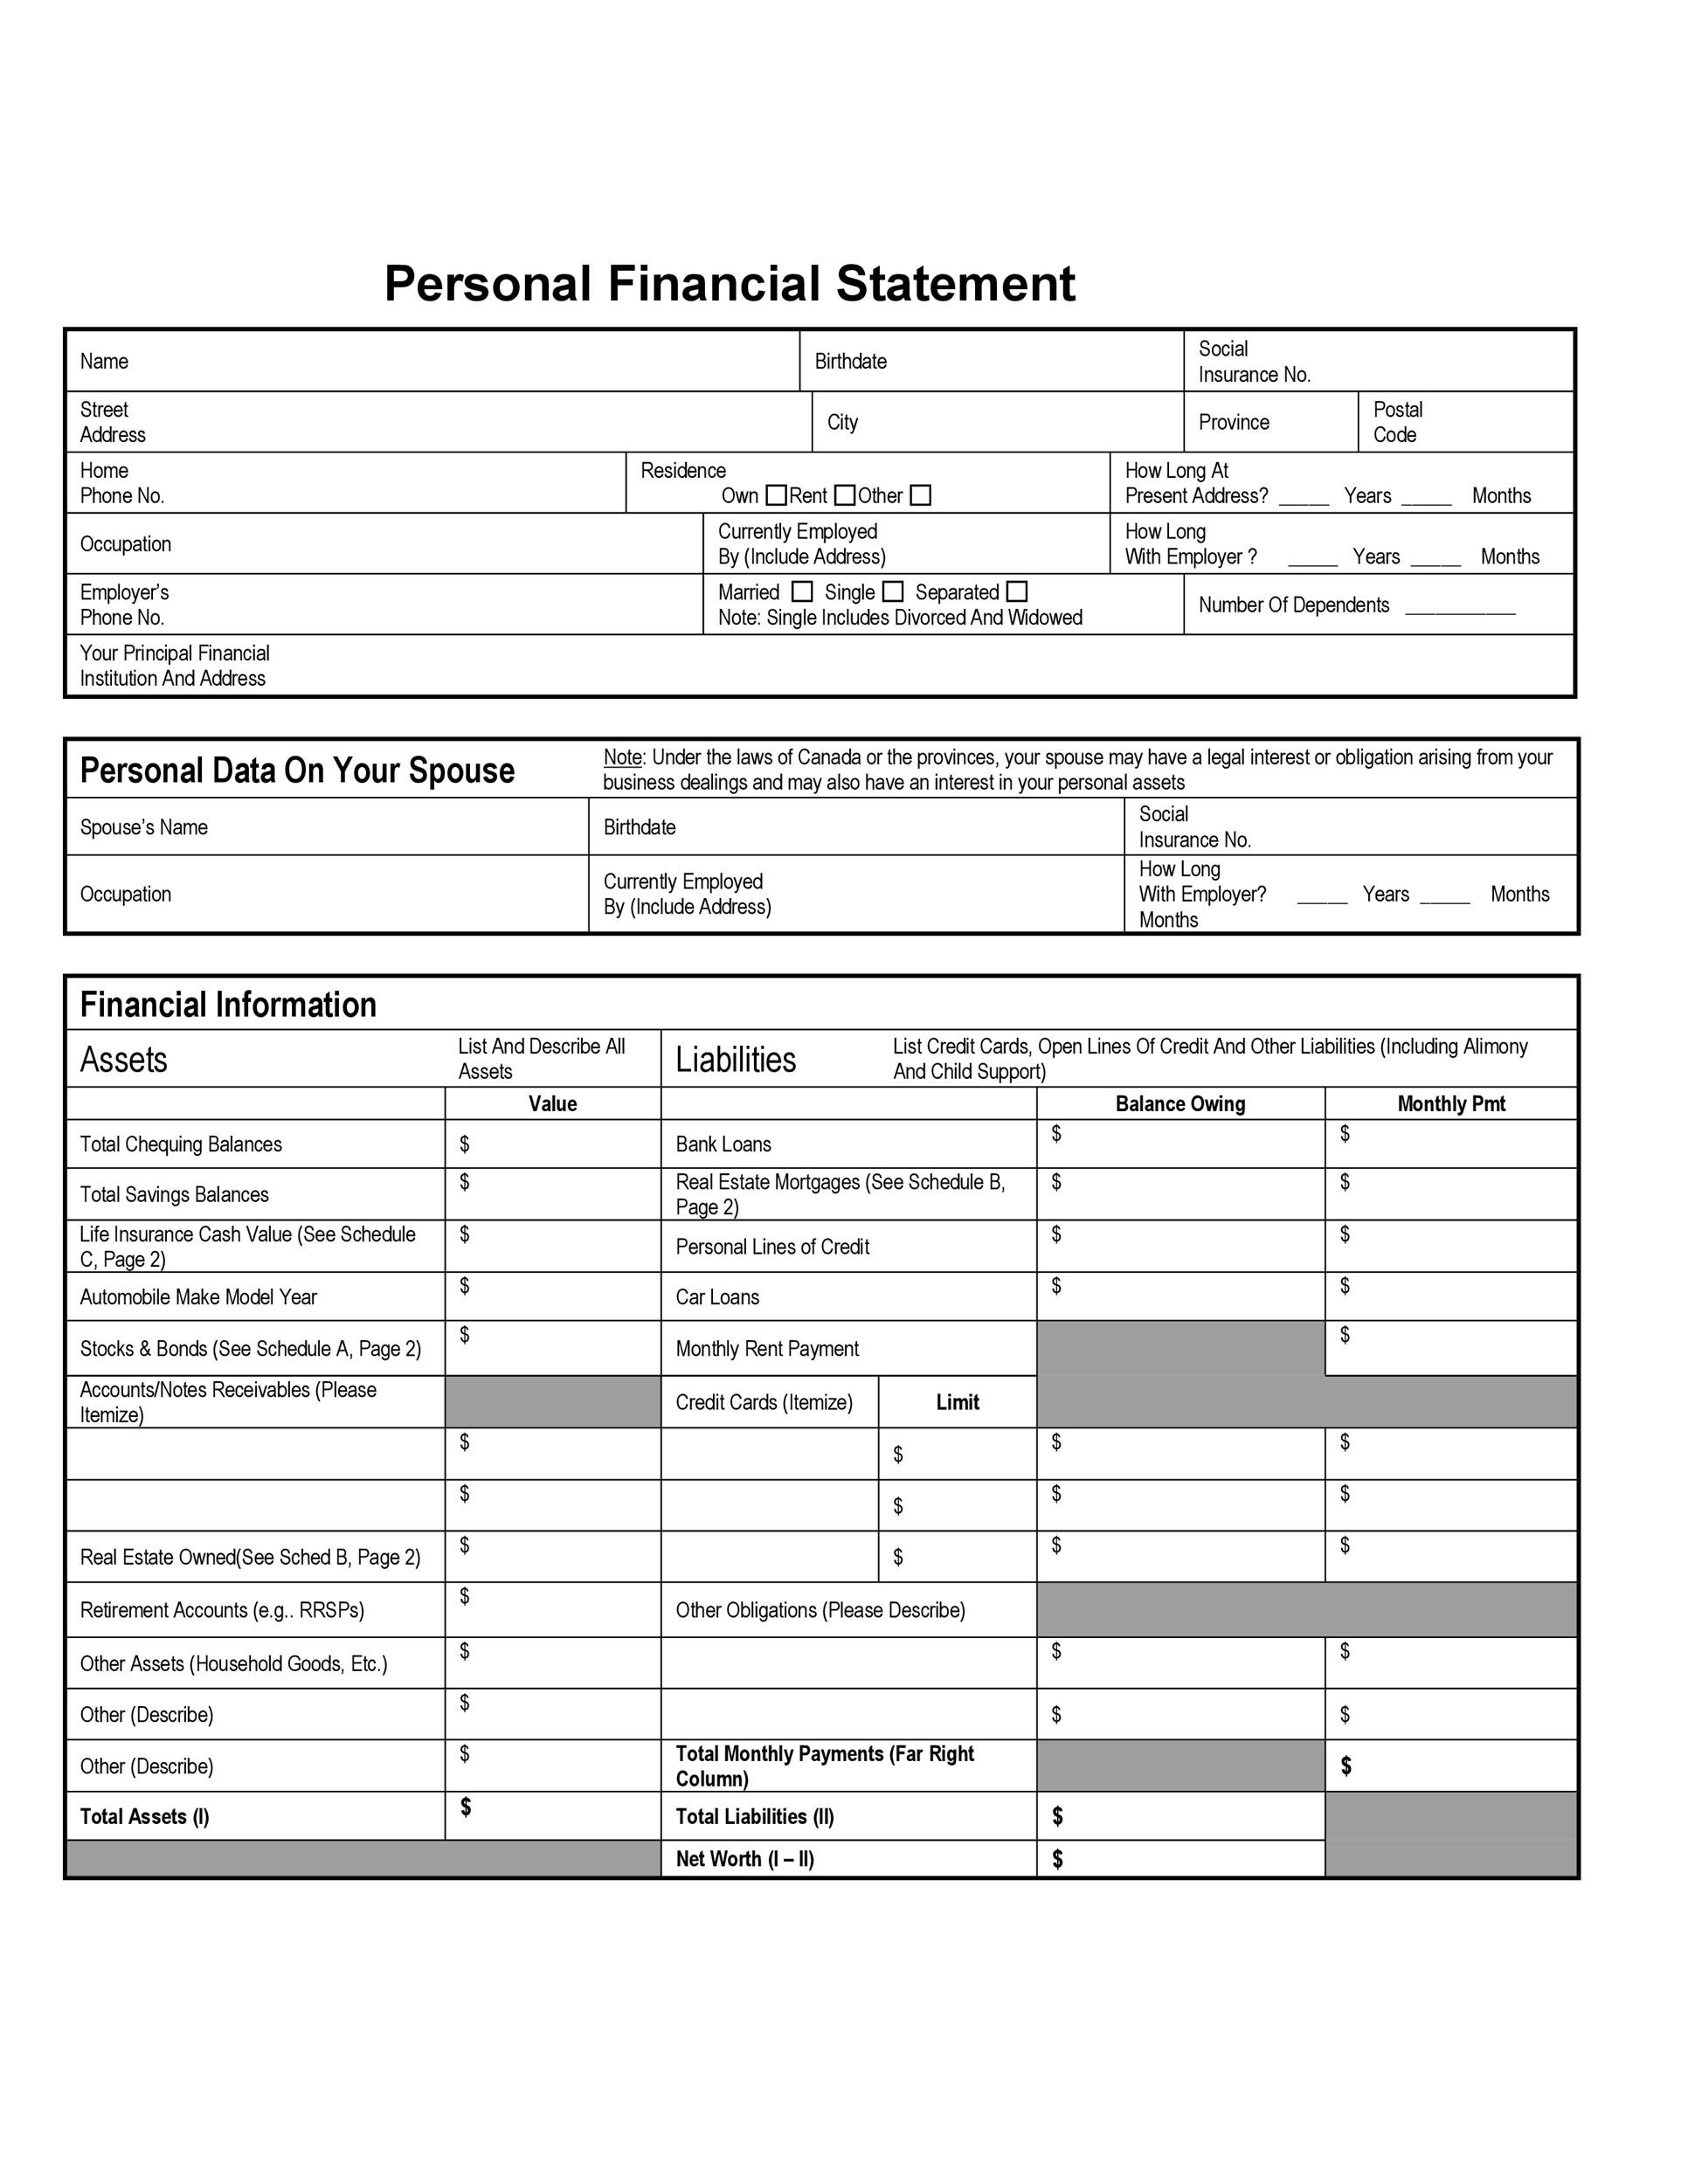 41 FREE Income Statement Templates & Examples - TemplateLab